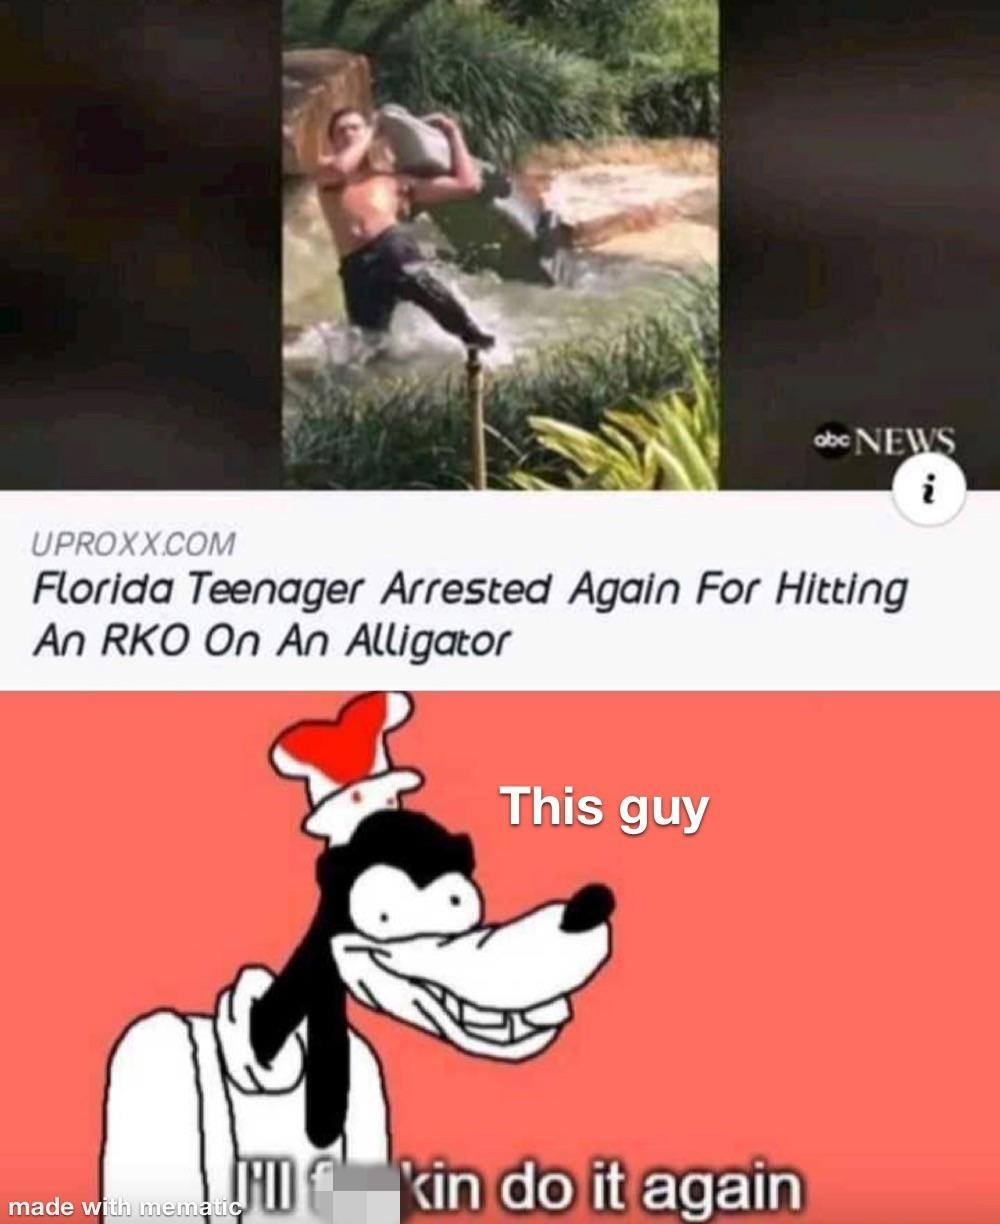 florida teenager meme - obc News Uproxx.Com Florida Teenager Arrested Again For Hitting An Rko On An Alligator This guy made with me I kin do it again